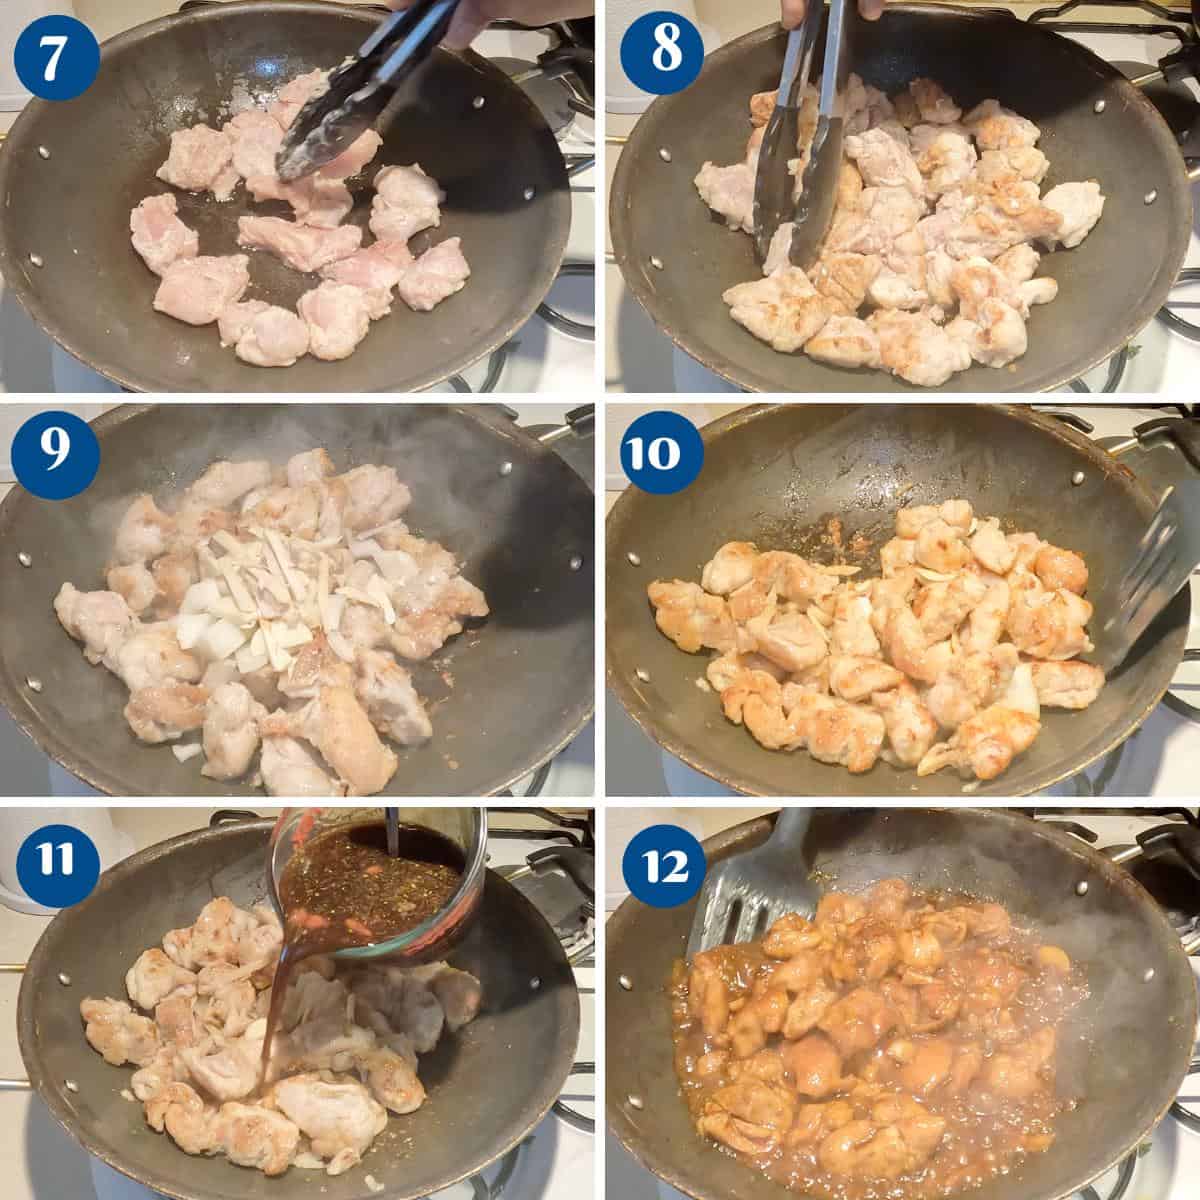 Progress pictures making the ginger chicken.